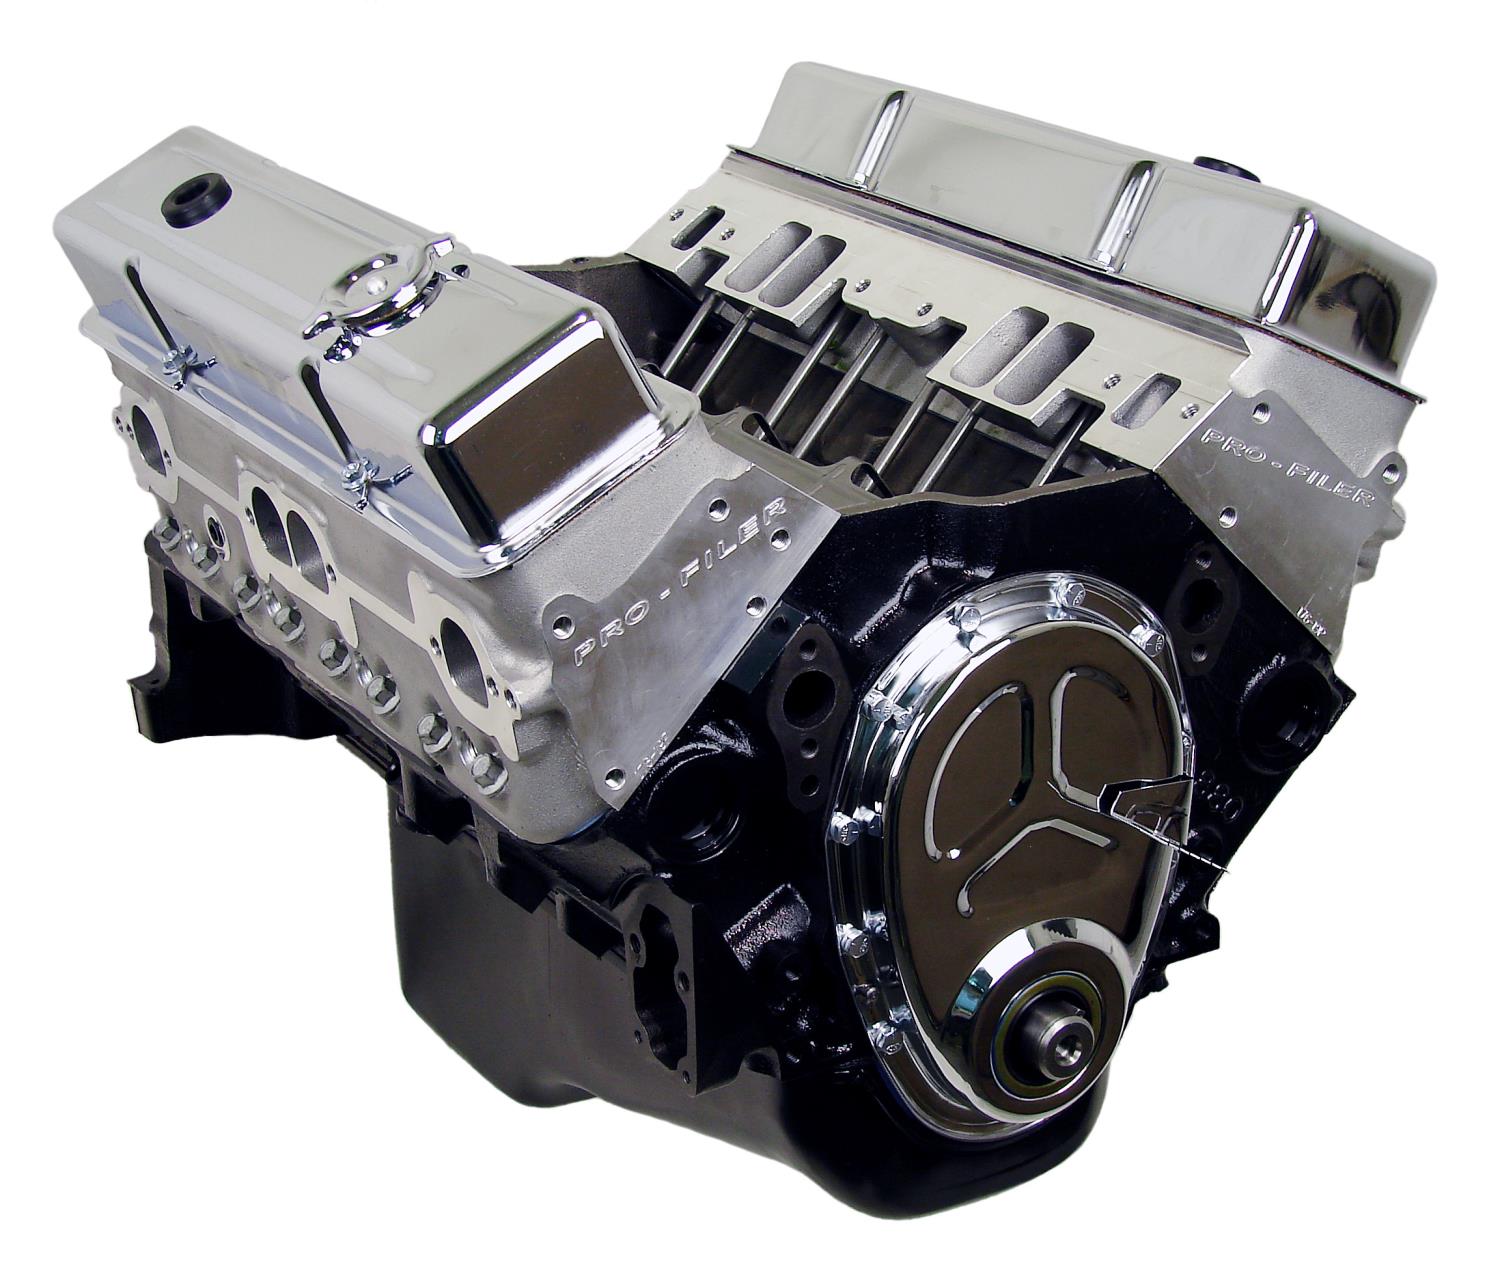 HP94 High Performance Crate Engine Small Block Chevy 383ci, 415 HP/460 ft.-lbs. TQ